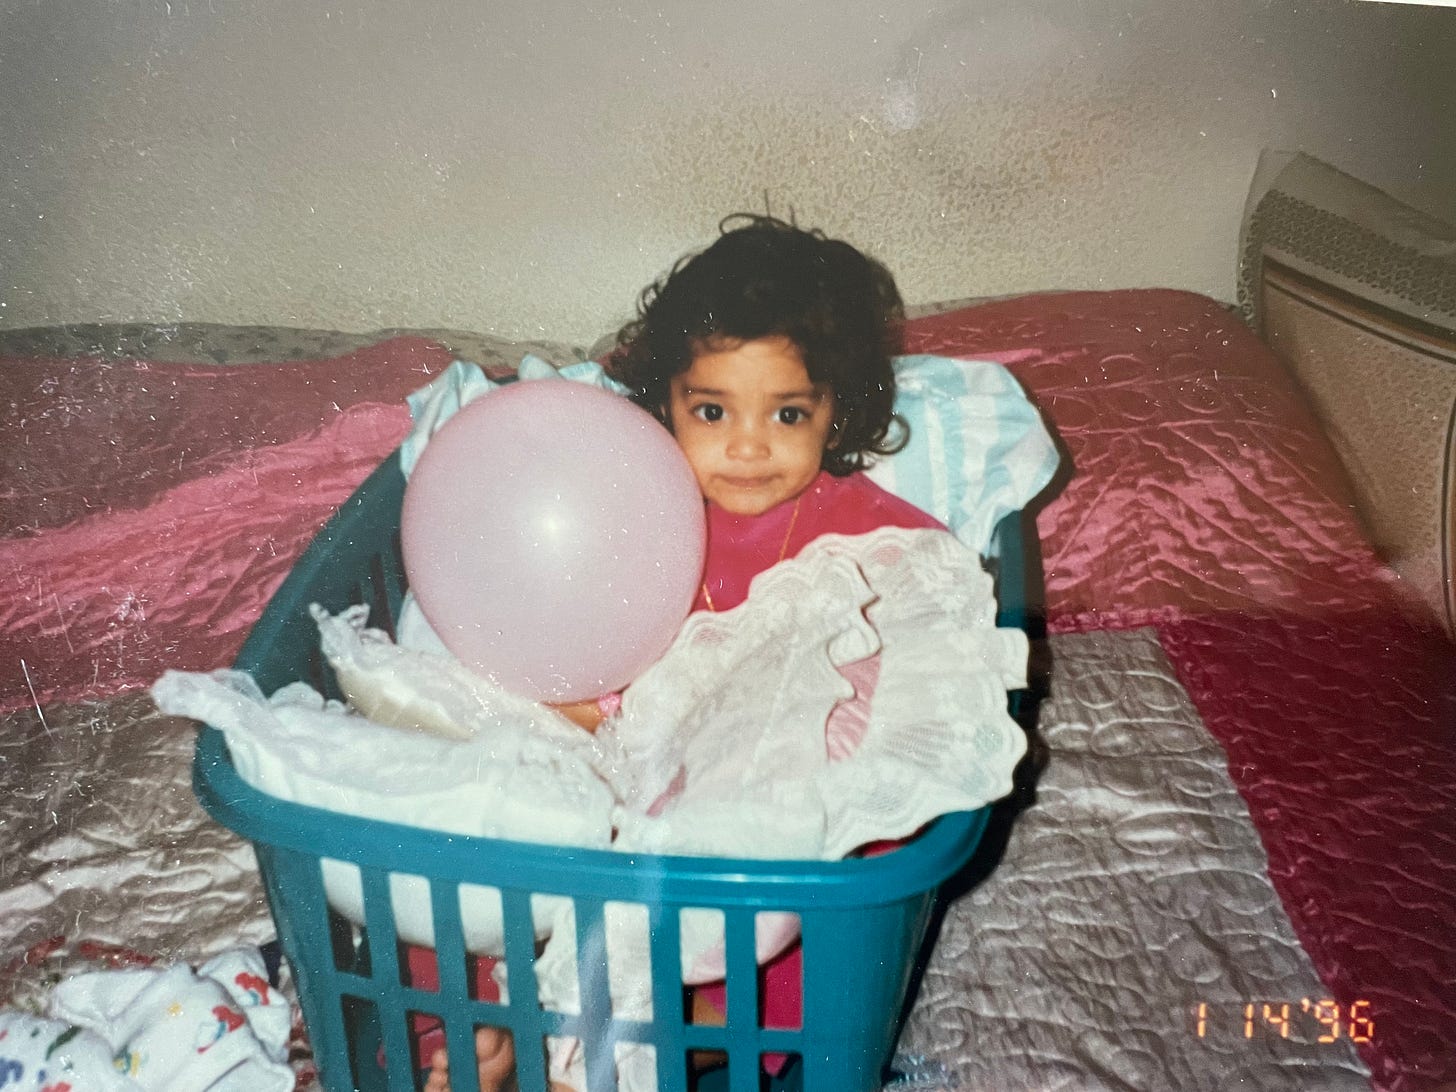 A toddler with curly hair sits inside of a green basket full of pillows. She holds a light pink balloon and is atop a bed with pink and white bedding.